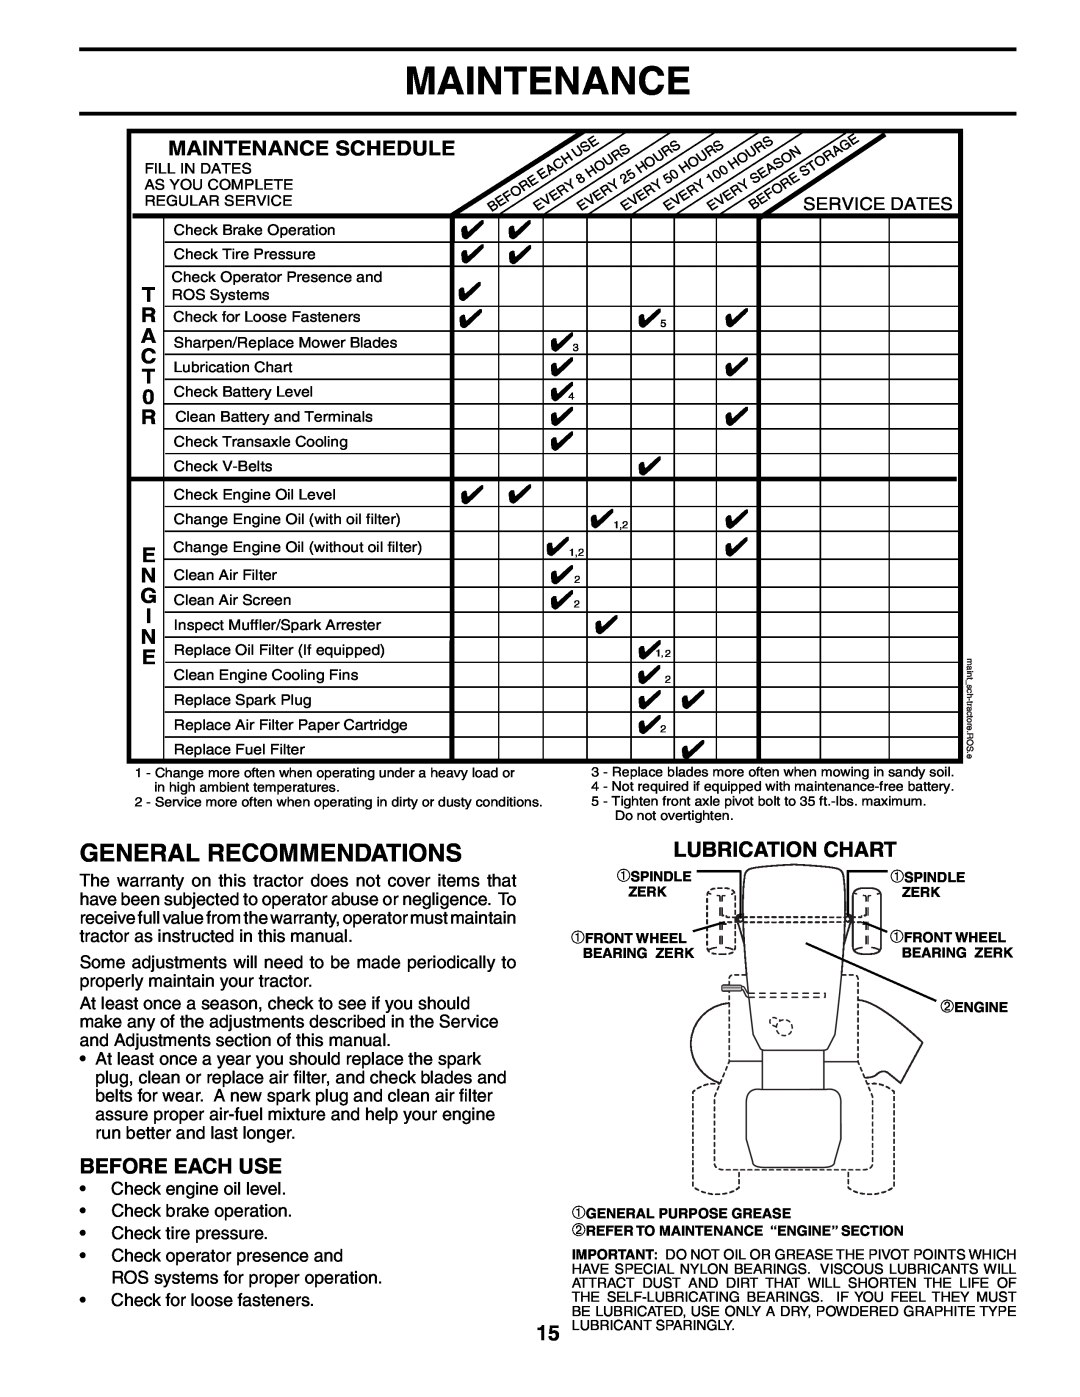 Poulan HD21H42 manual General Recommendations, Lubrication Chart, Before Each Use, Maintenance Schedule 